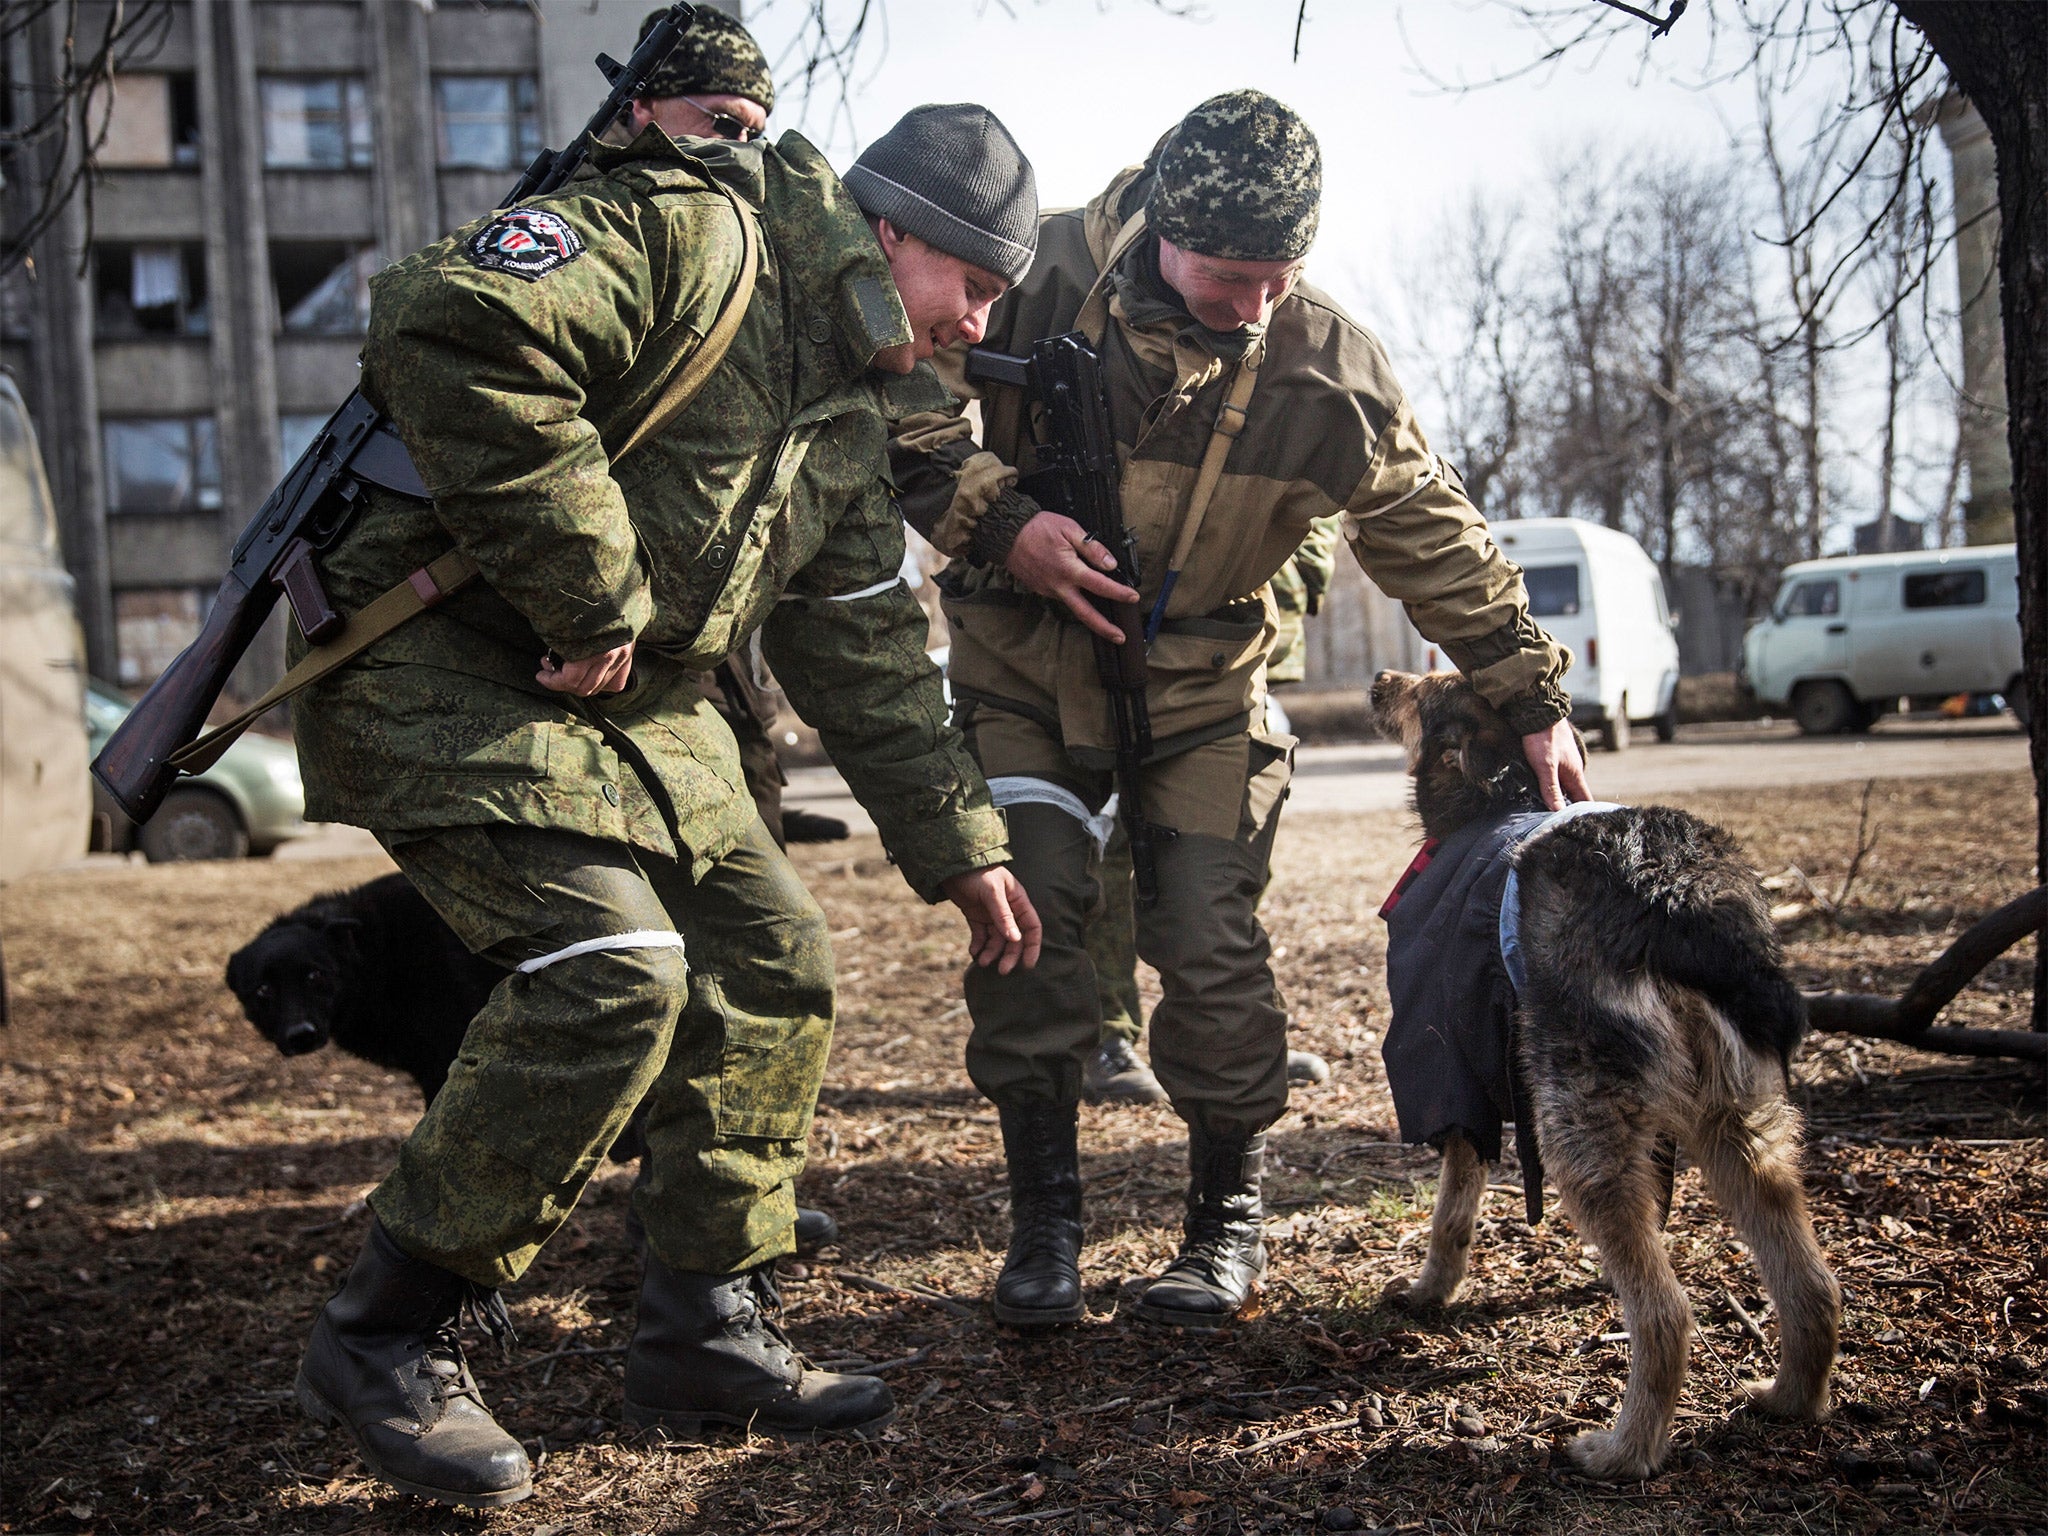 Russian backed rebels make play with a stray dog in Debaltseve on Wednesday